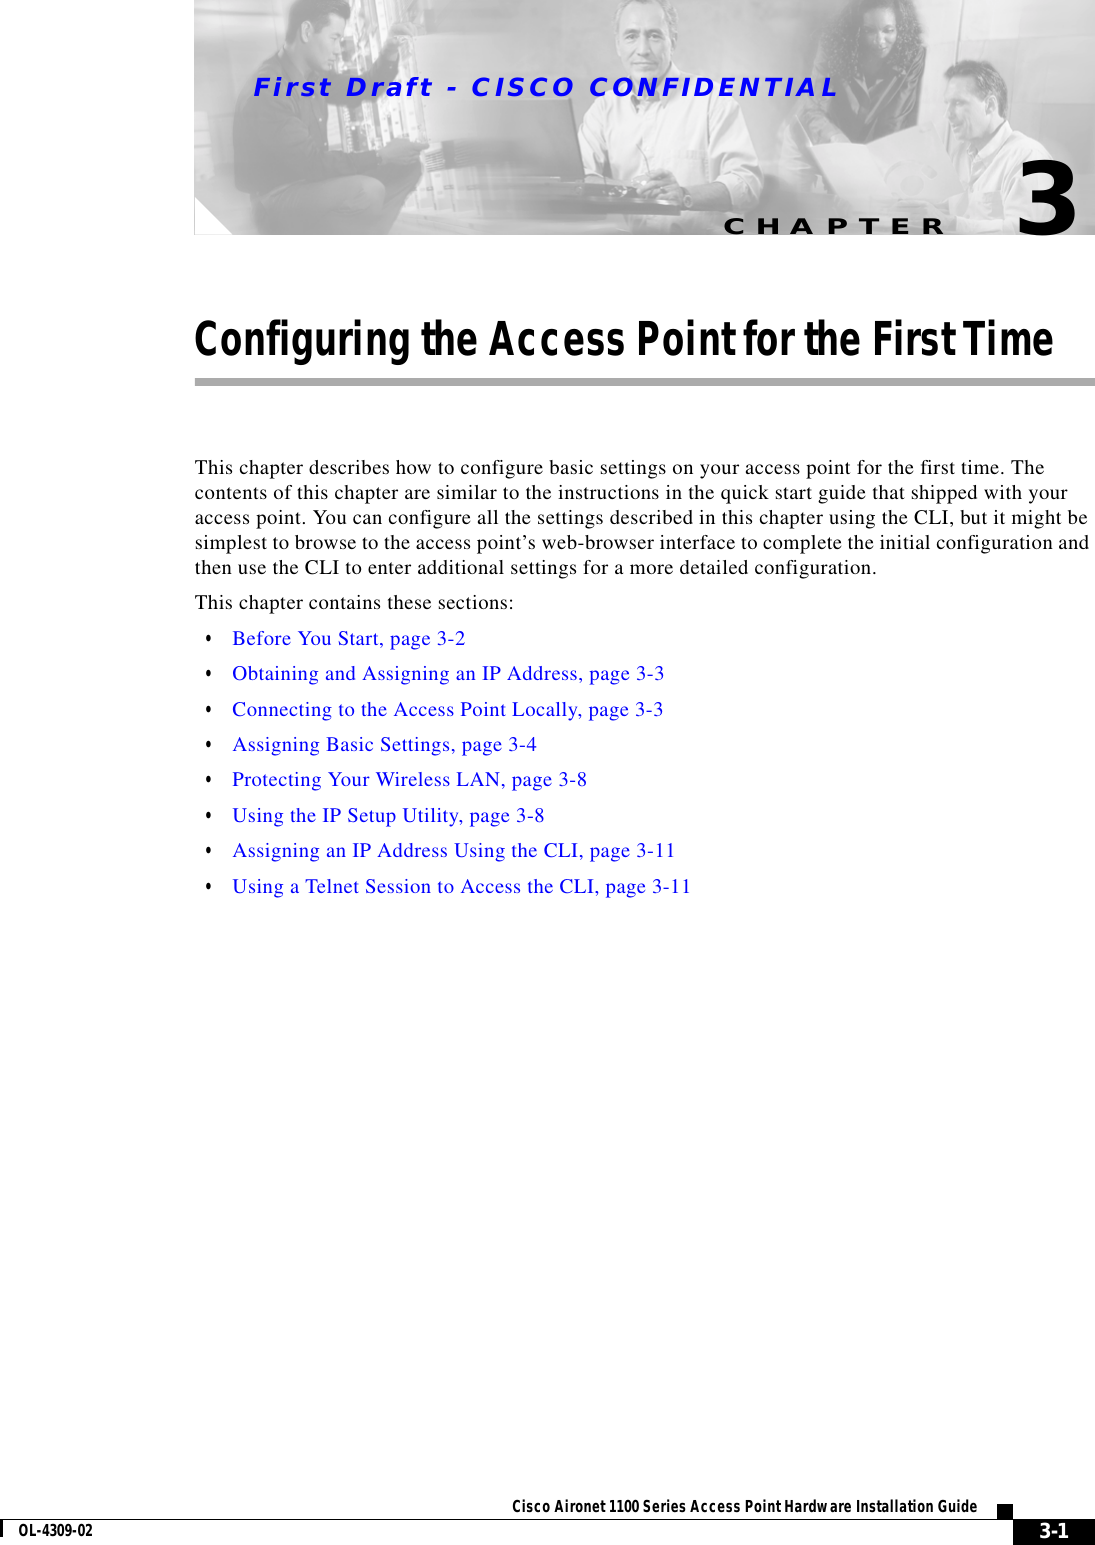 CHAPTERFirst Draft - CISCO CONFIDENTIAL3-1Cisco Aironet 1100 Series Access Point Hardware Installation GuideOL-4309-023Configuring the Access Point for the First TimeThis chapter describes how to configure basic settings on your access point for the first time. The contents of this chapter are similar to the instructions in the quick start guide that shipped with your access point. You can configure all the settings described in this chapter using the CLI, but it might be simplest to browse to the access point’s web-browser interface to complete the initial configuration and then use the CLI to enter additional settings for a more detailed configuration. This chapter contains these sections:•Before You Start, page 3-2•Obtaining and Assigning an IP Address, page 3-3•Connecting to the Access Point Locally, page 3-3•Assigning Basic Settings, page 3-4•Protecting Your Wireless LAN, page 3-8•Using the IP Setup Utility, page 3-8•Assigning an IP Address Using the CLI, page 3-11•Using a Telnet Session to Access the CLI, page 3-11